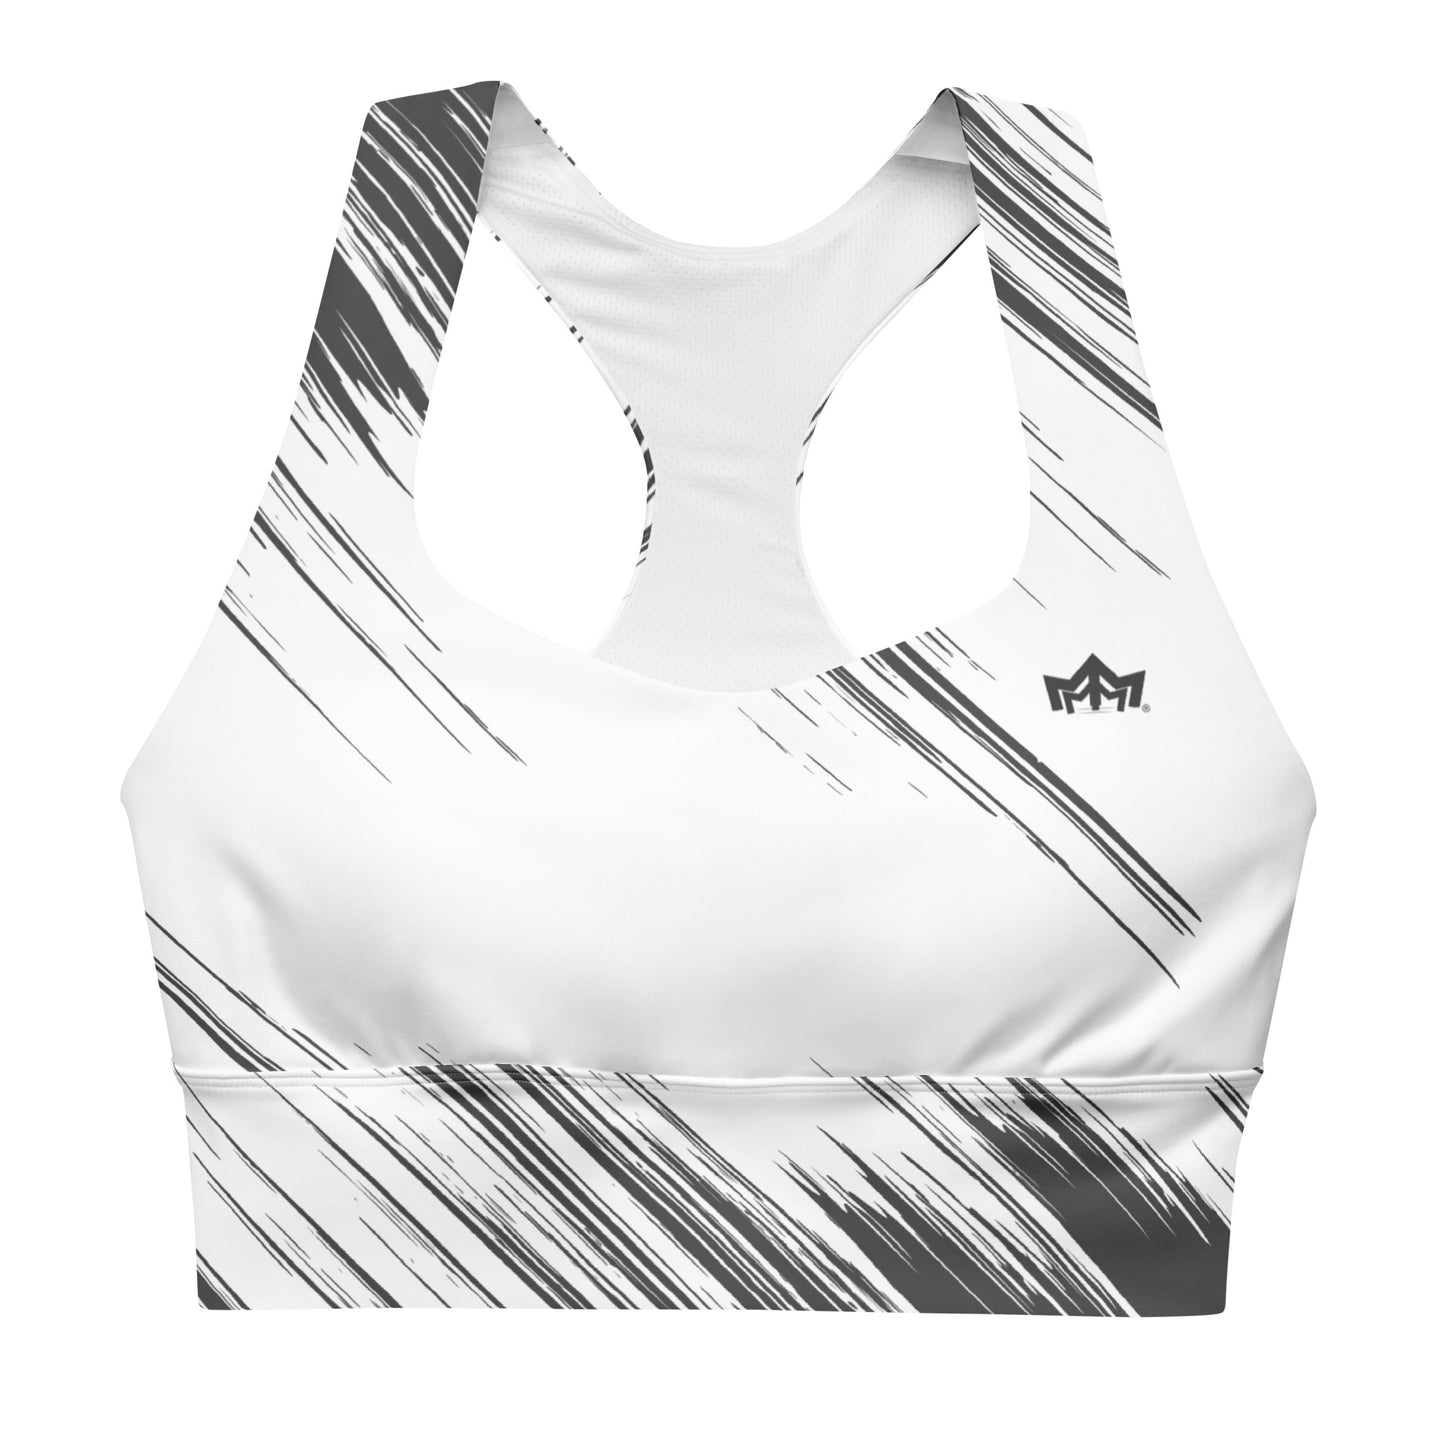 Masterminding Me "I Earned This" Women's Compression Bra - Black and White